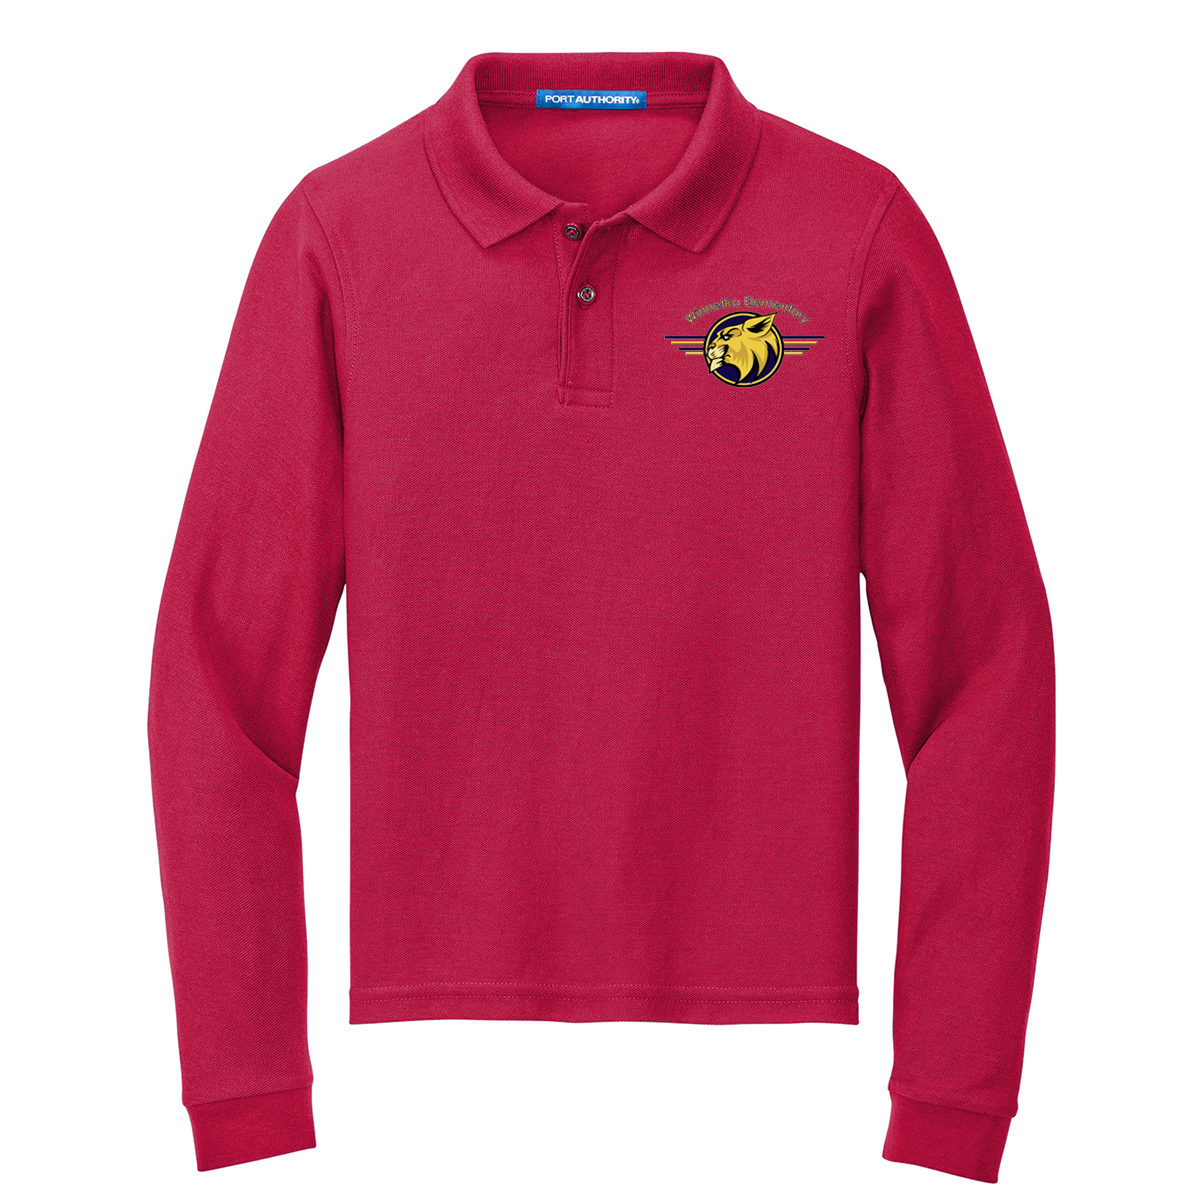 Winnetka - Youth Long Sleeve Polo - Red (Y500LS) - Southern Grace Creations